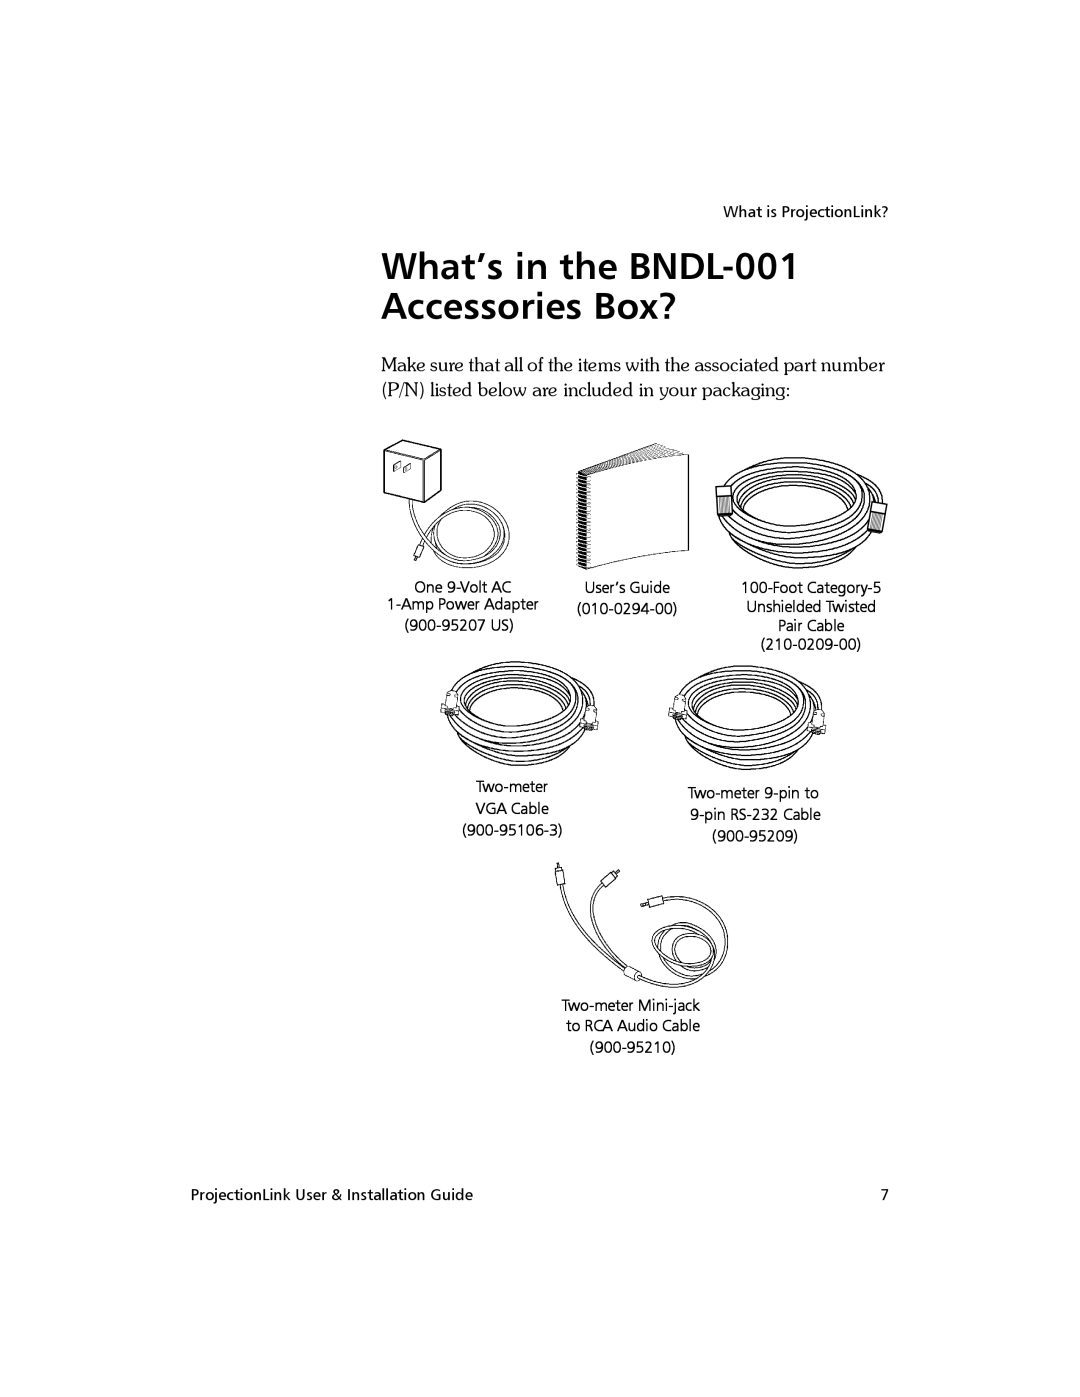 Proxima ASA PL-300 What’s in the BNDL-001 Accessories Box?, What is ProjectionLink?, 010-0294-00, 900-95207 US, 900-95209 